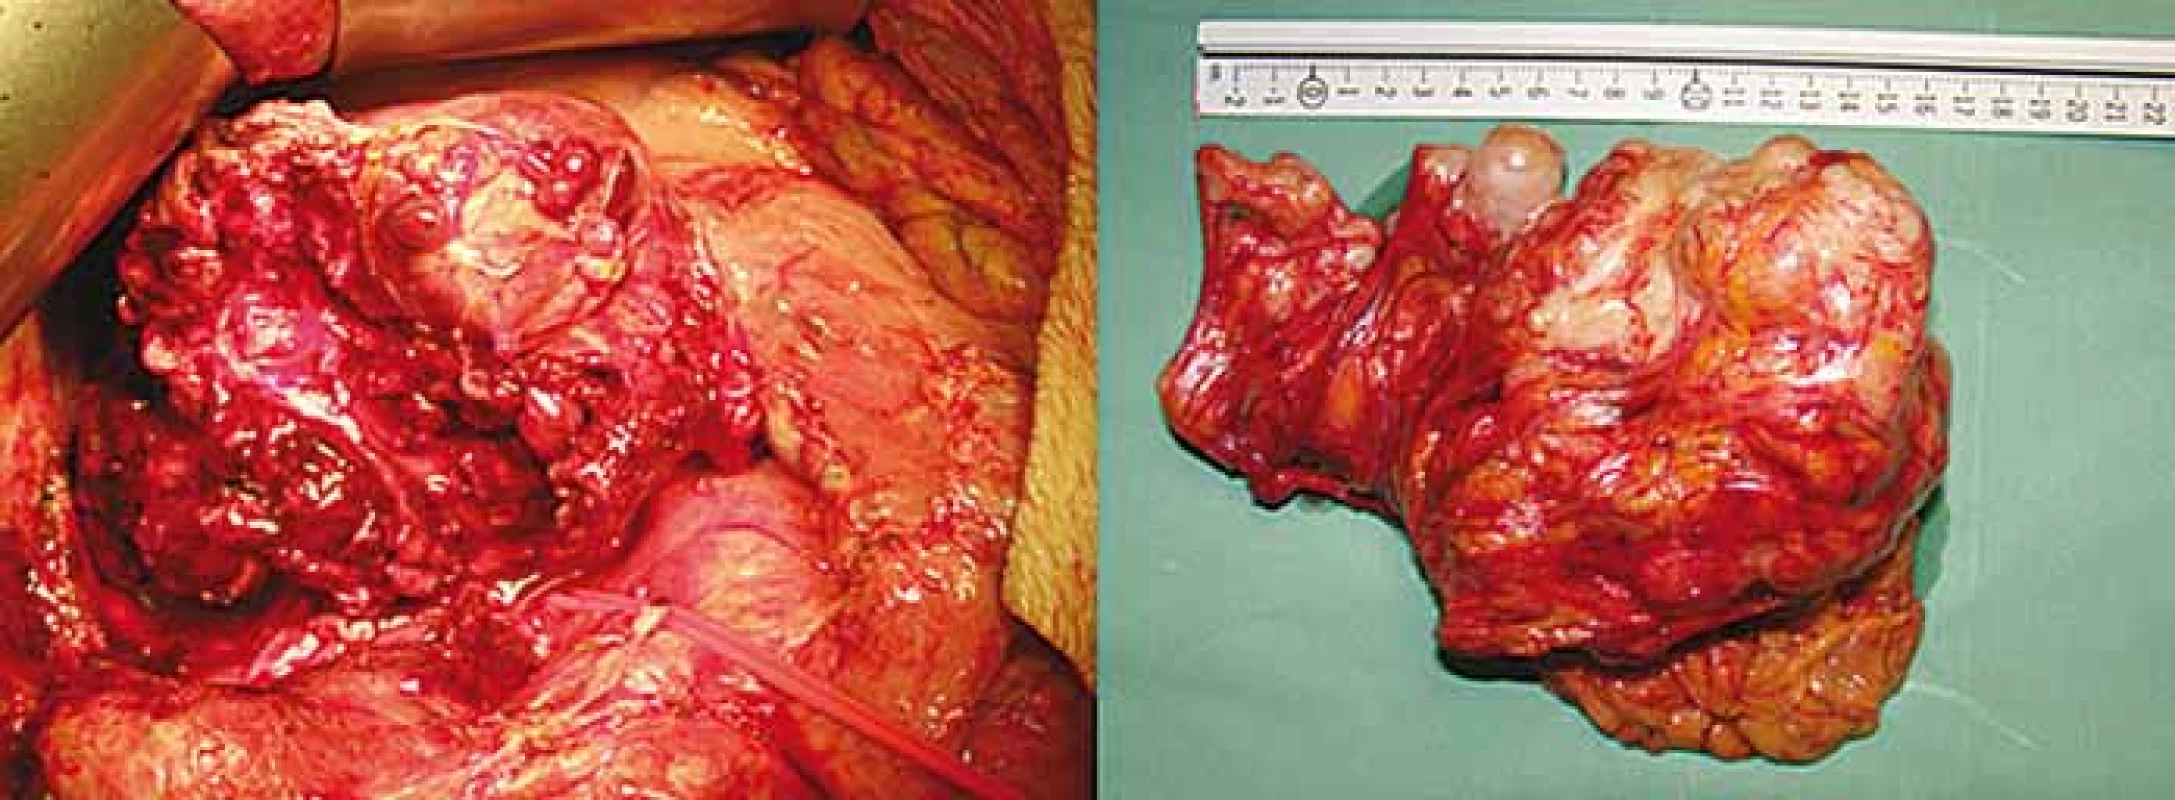 A. Intraoperative photo showing gastrointestinal stromal tumor and diaphragmatic
crus. 3B. Specimen after proximal gastrectomy showing “en-block” tumor and
esophago-gastric junction.